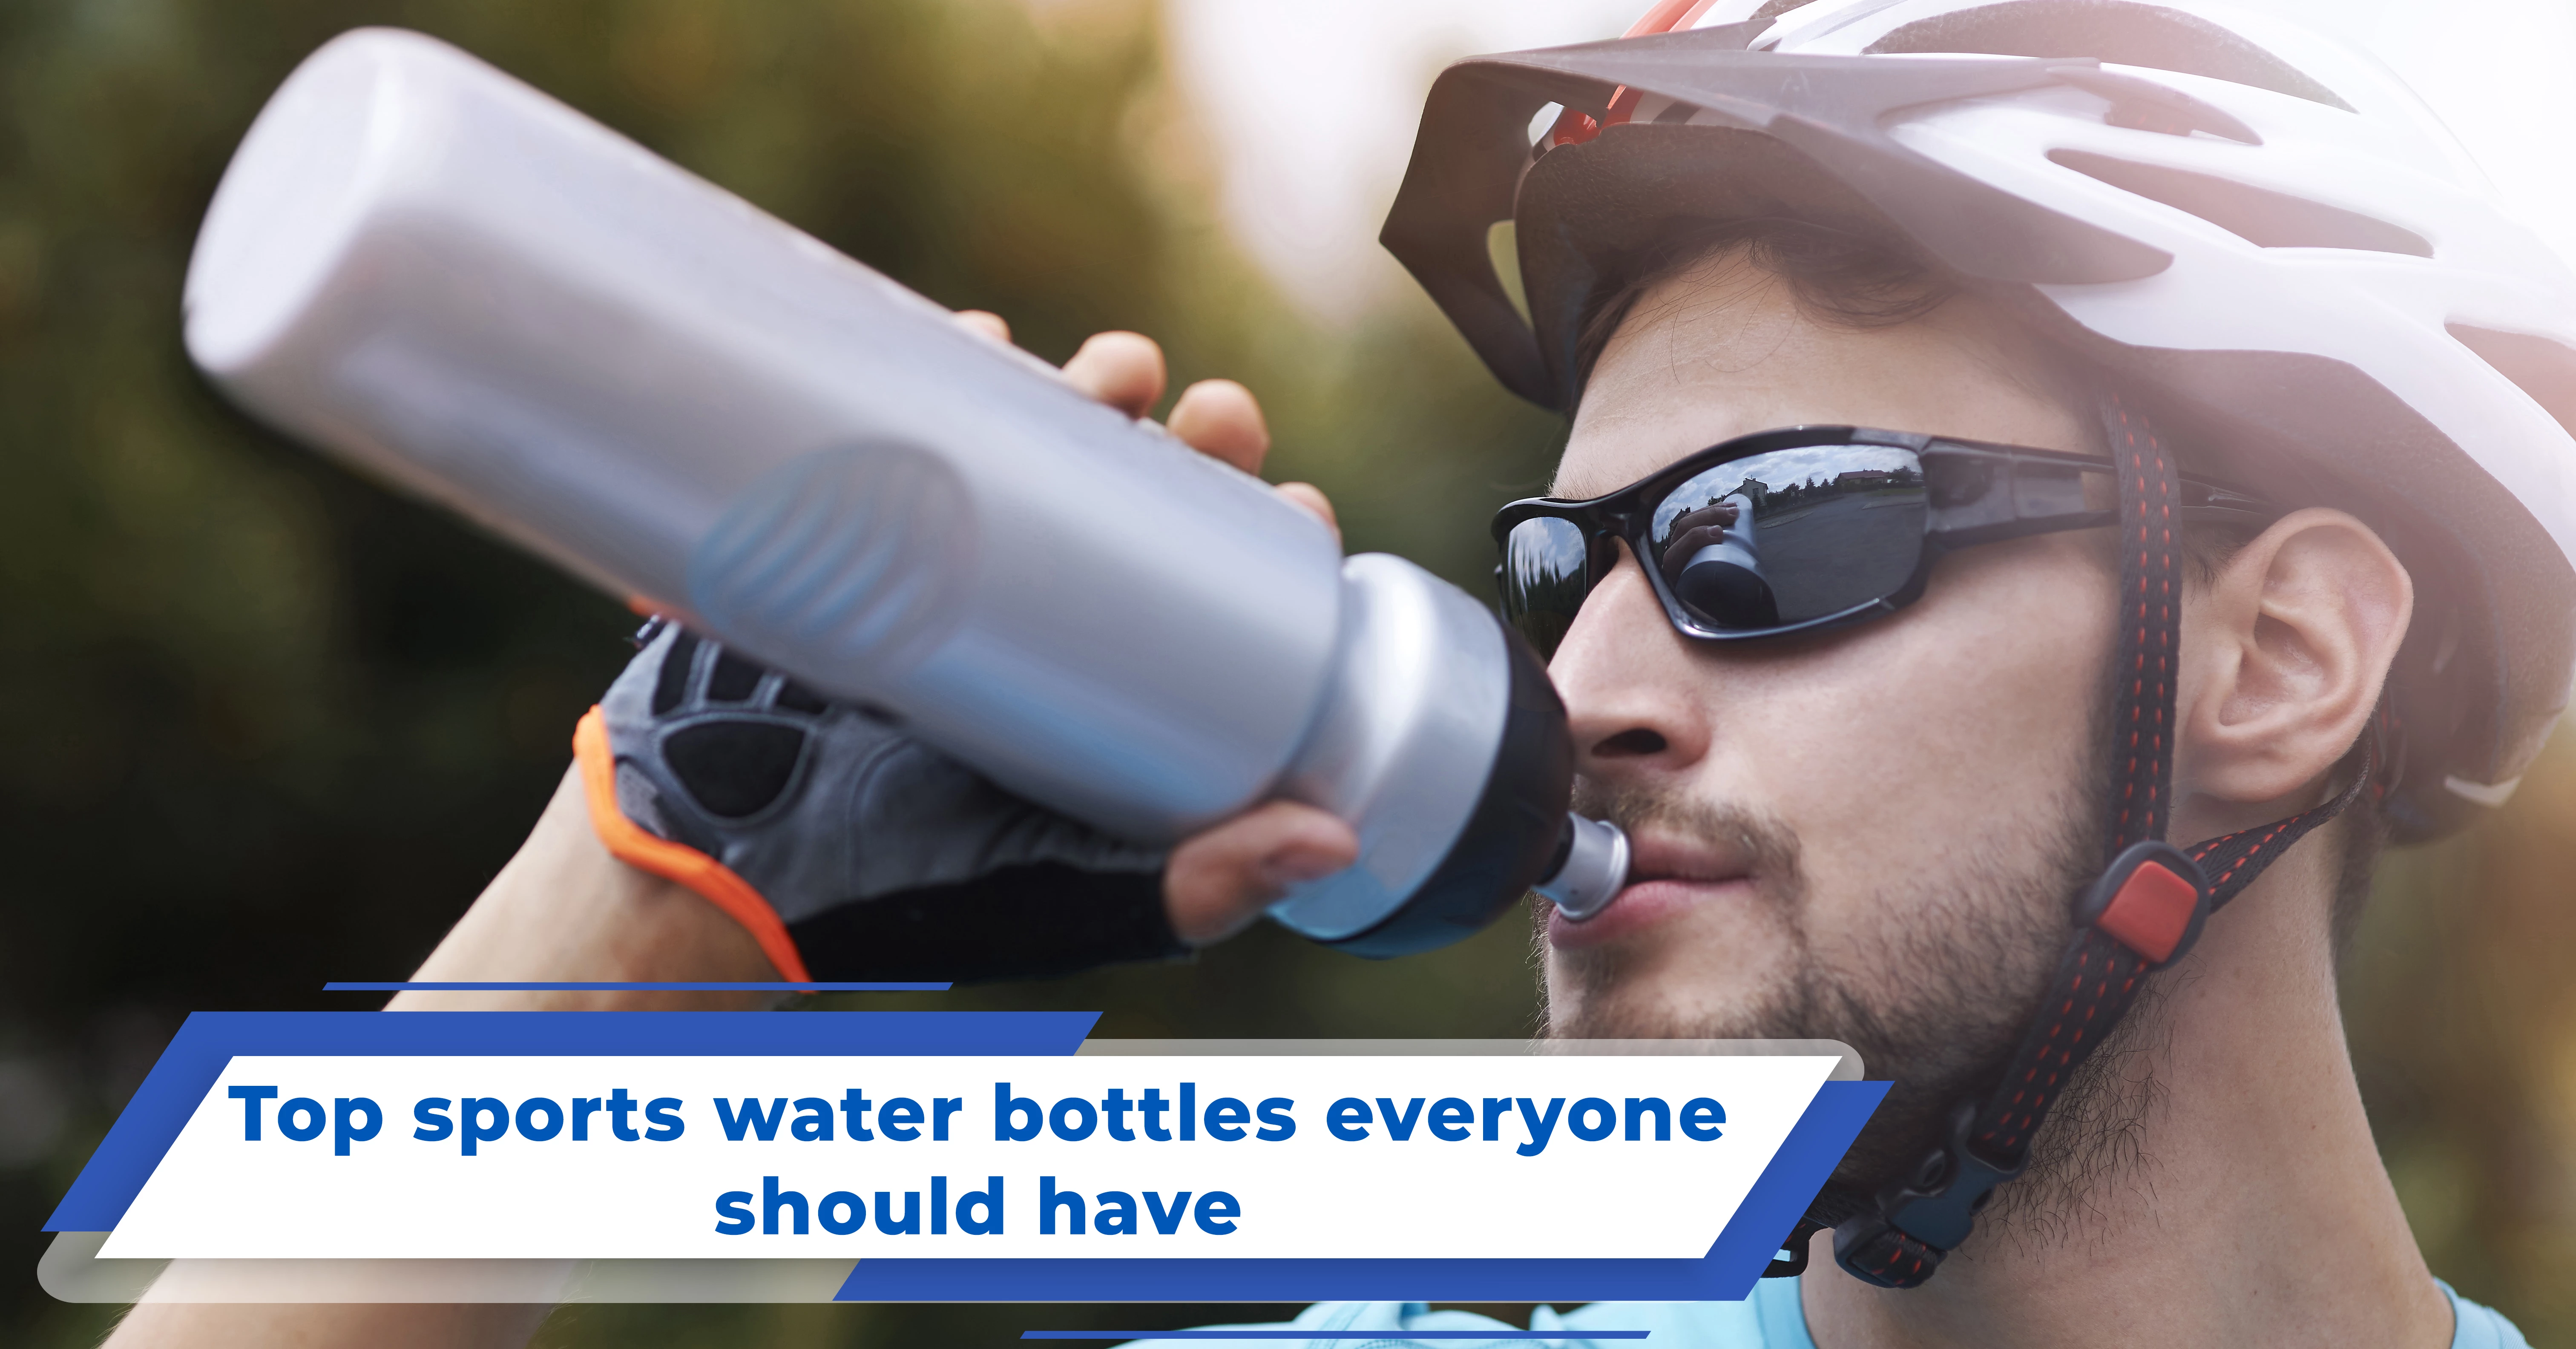 Top sports water bottles everyone should have